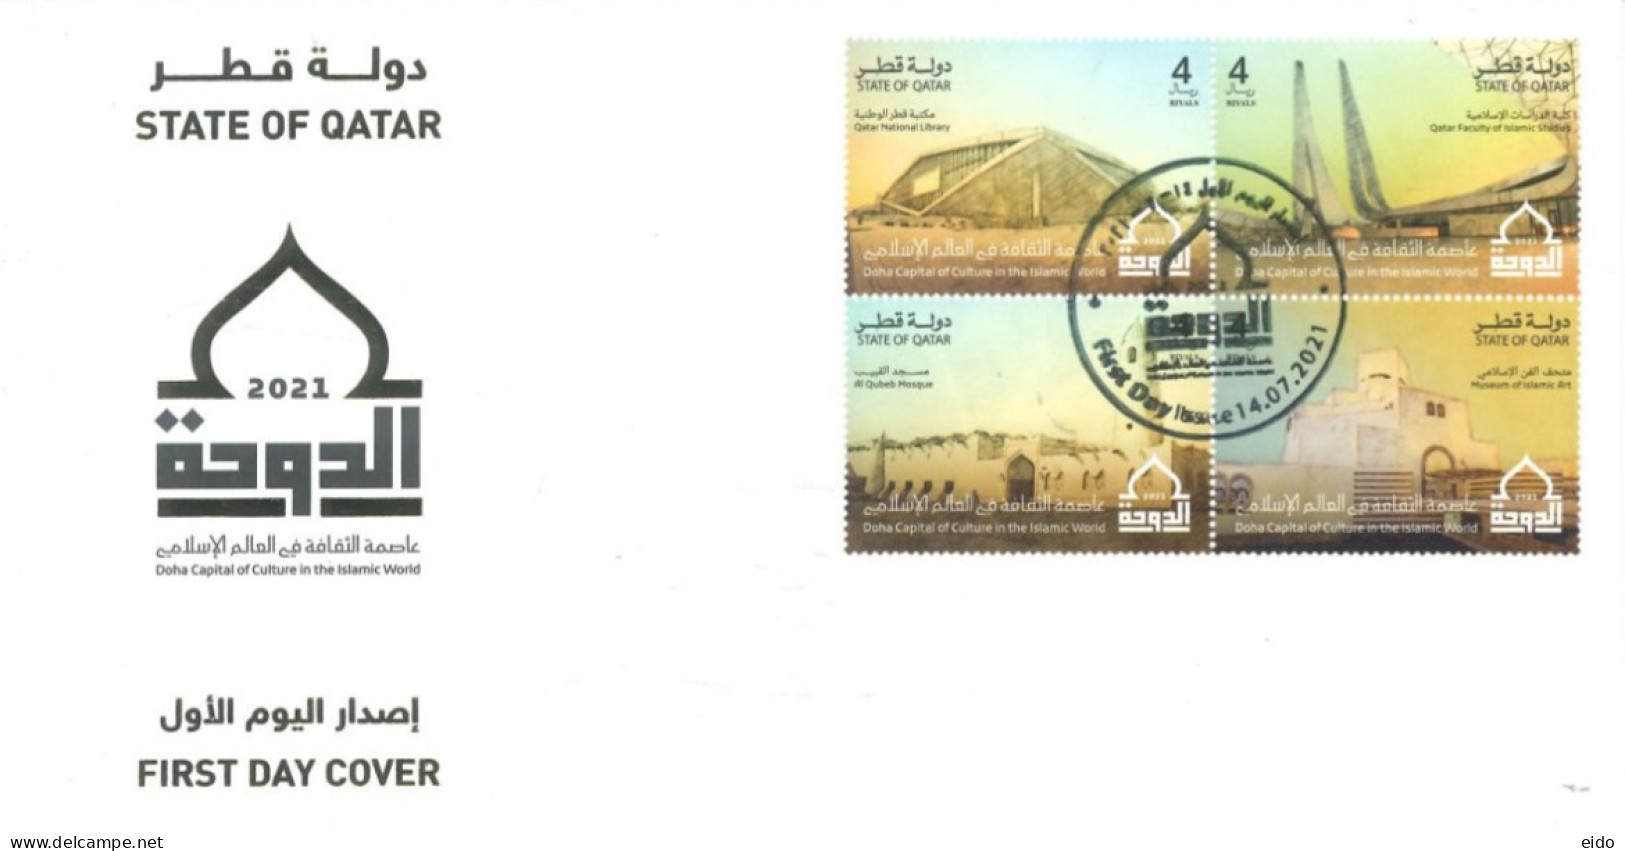 QATAR  - 2021-  FDC OF DOHA CAPITAL OF CULTURE IN THE ISLAMIC WORLD STAMPS. - Qatar